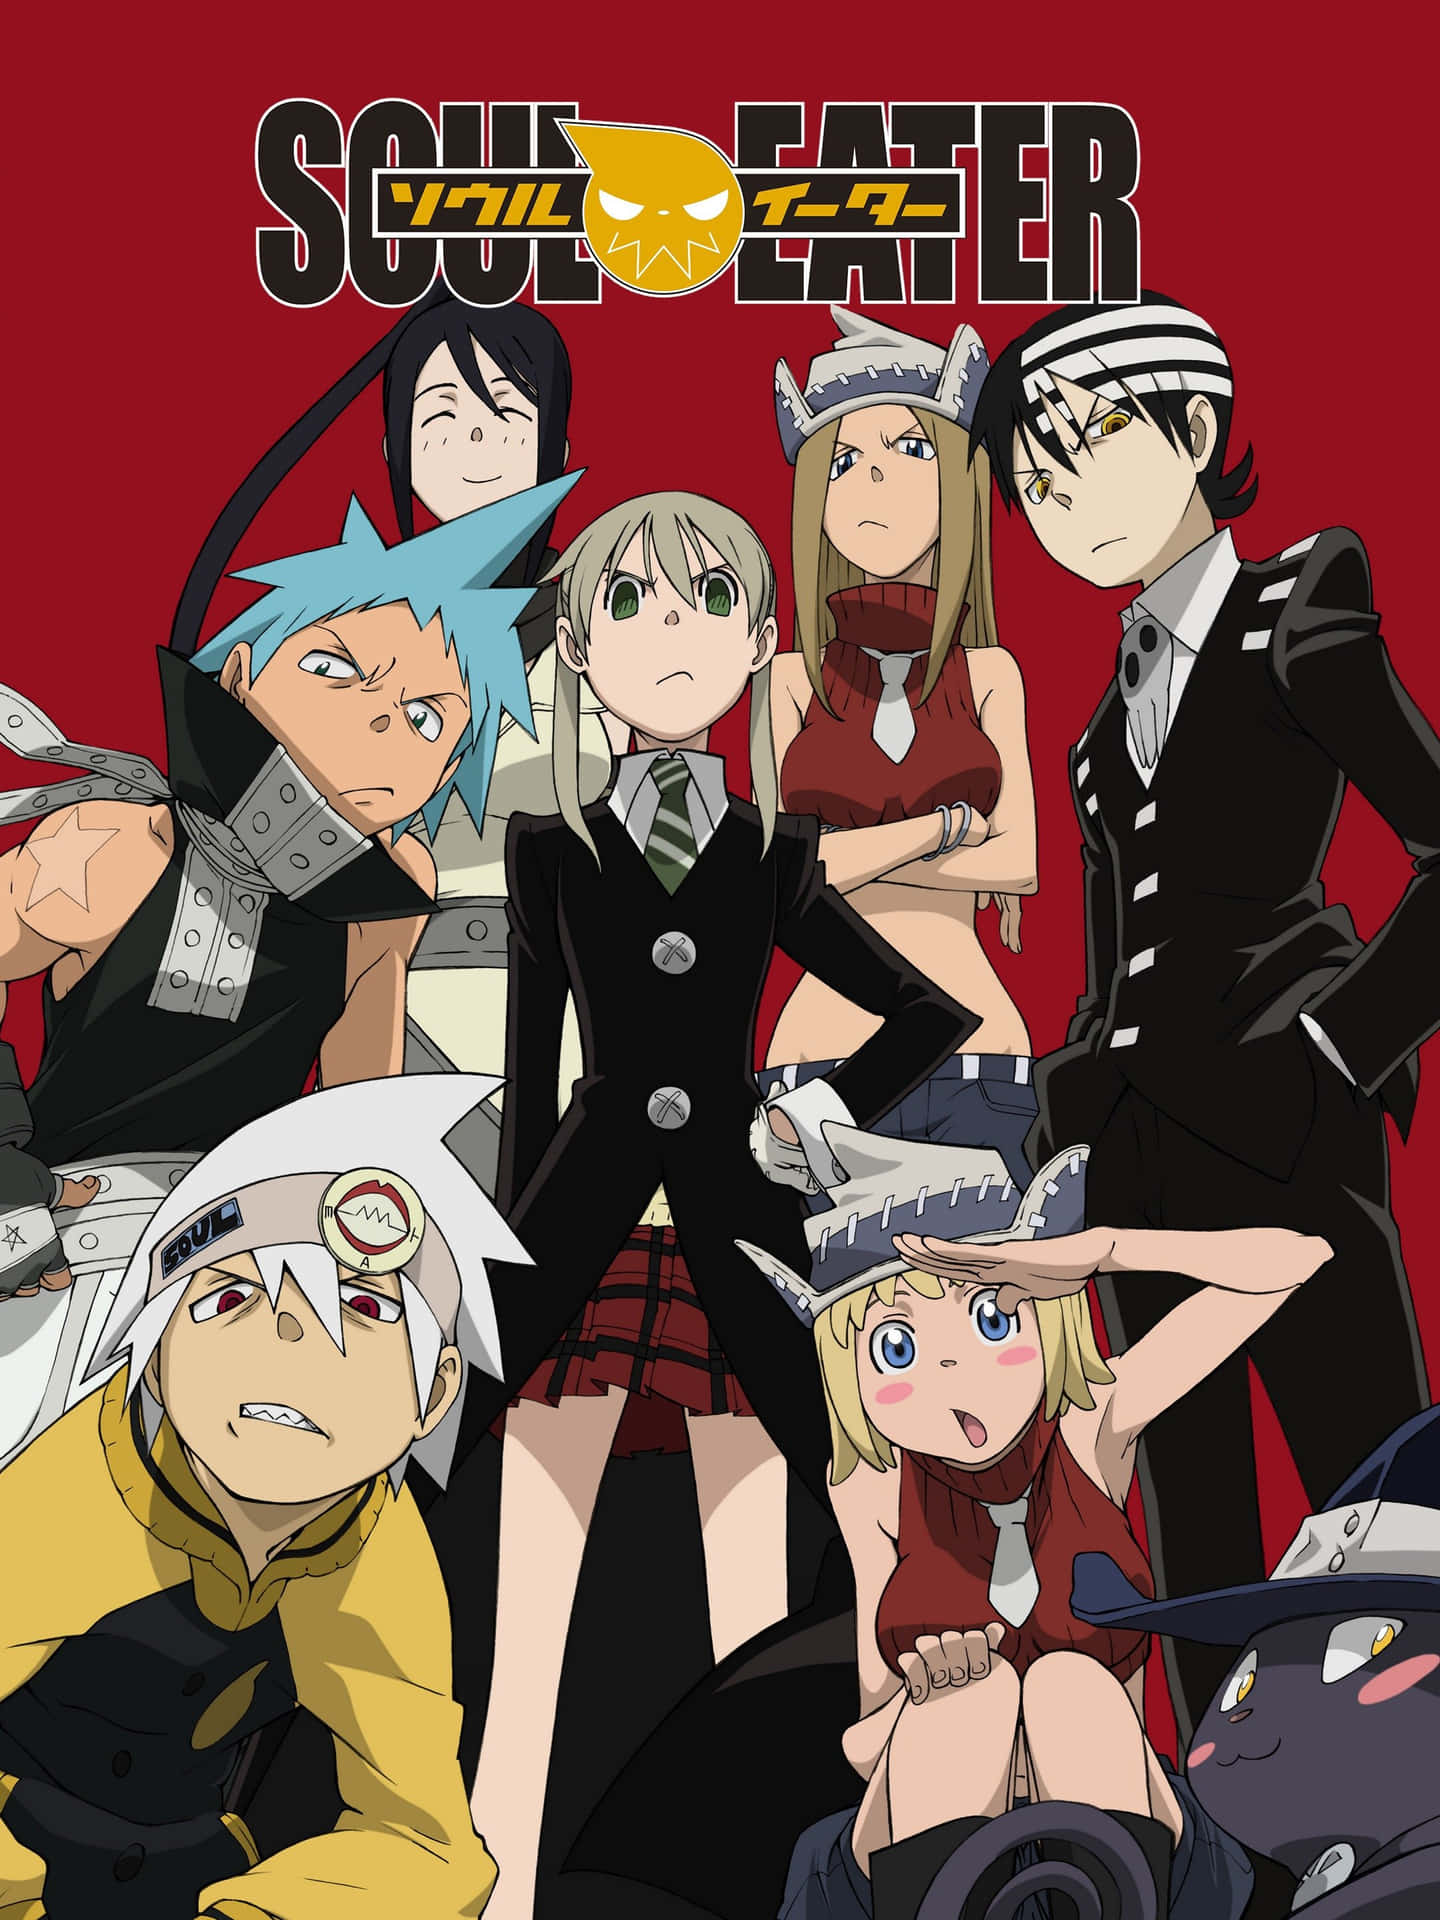 Soul Eater – A Tale of Friendship and Adventure